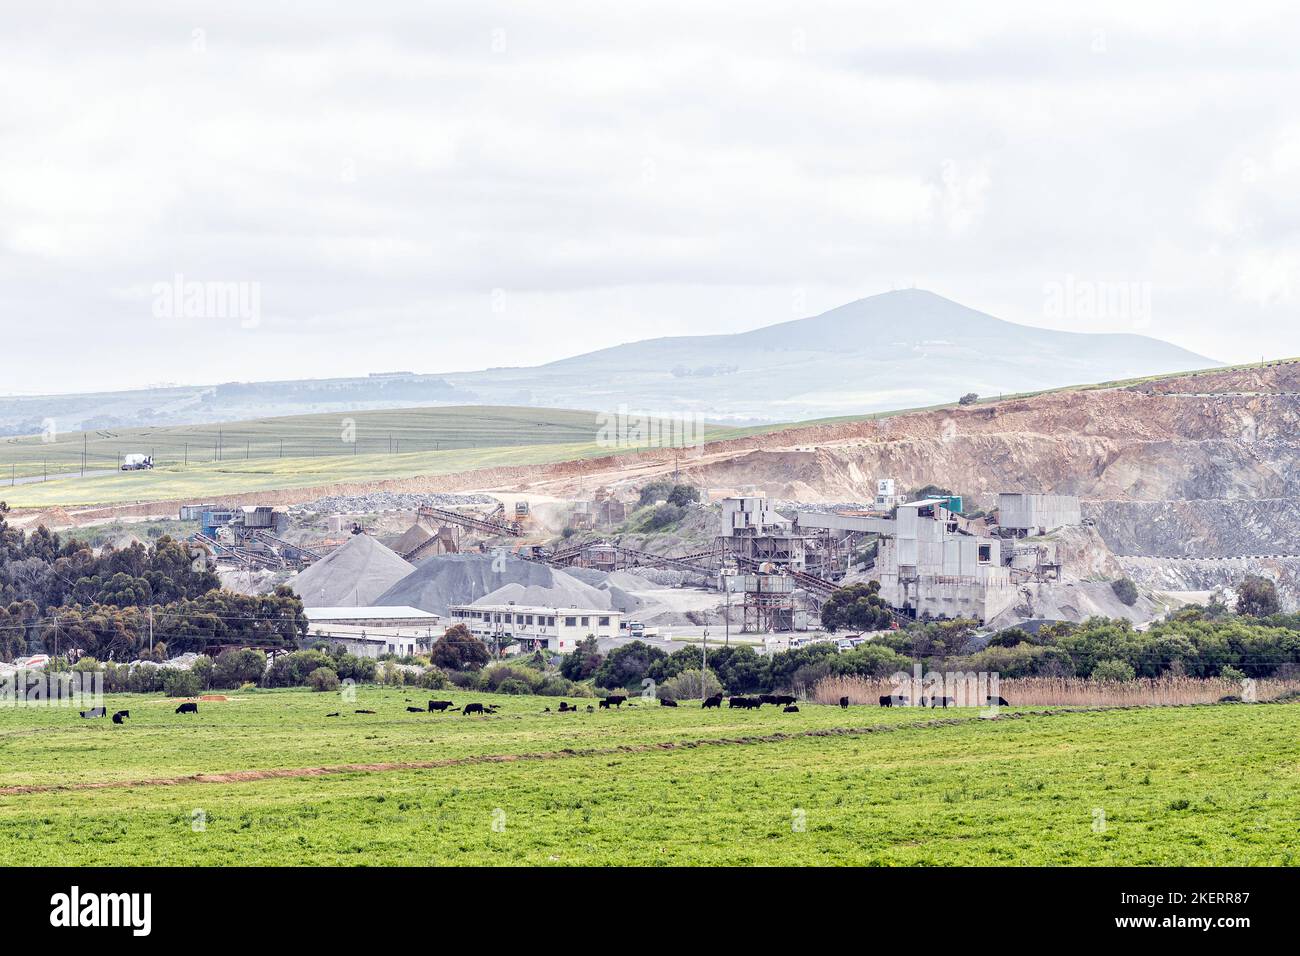 Cape Town, South Africa - Sep 16, 2022: The Ciolli Bros stone crusher plant and open cast mine at Durbanville Hills in the Western Cape Province. Catt Stock Photo